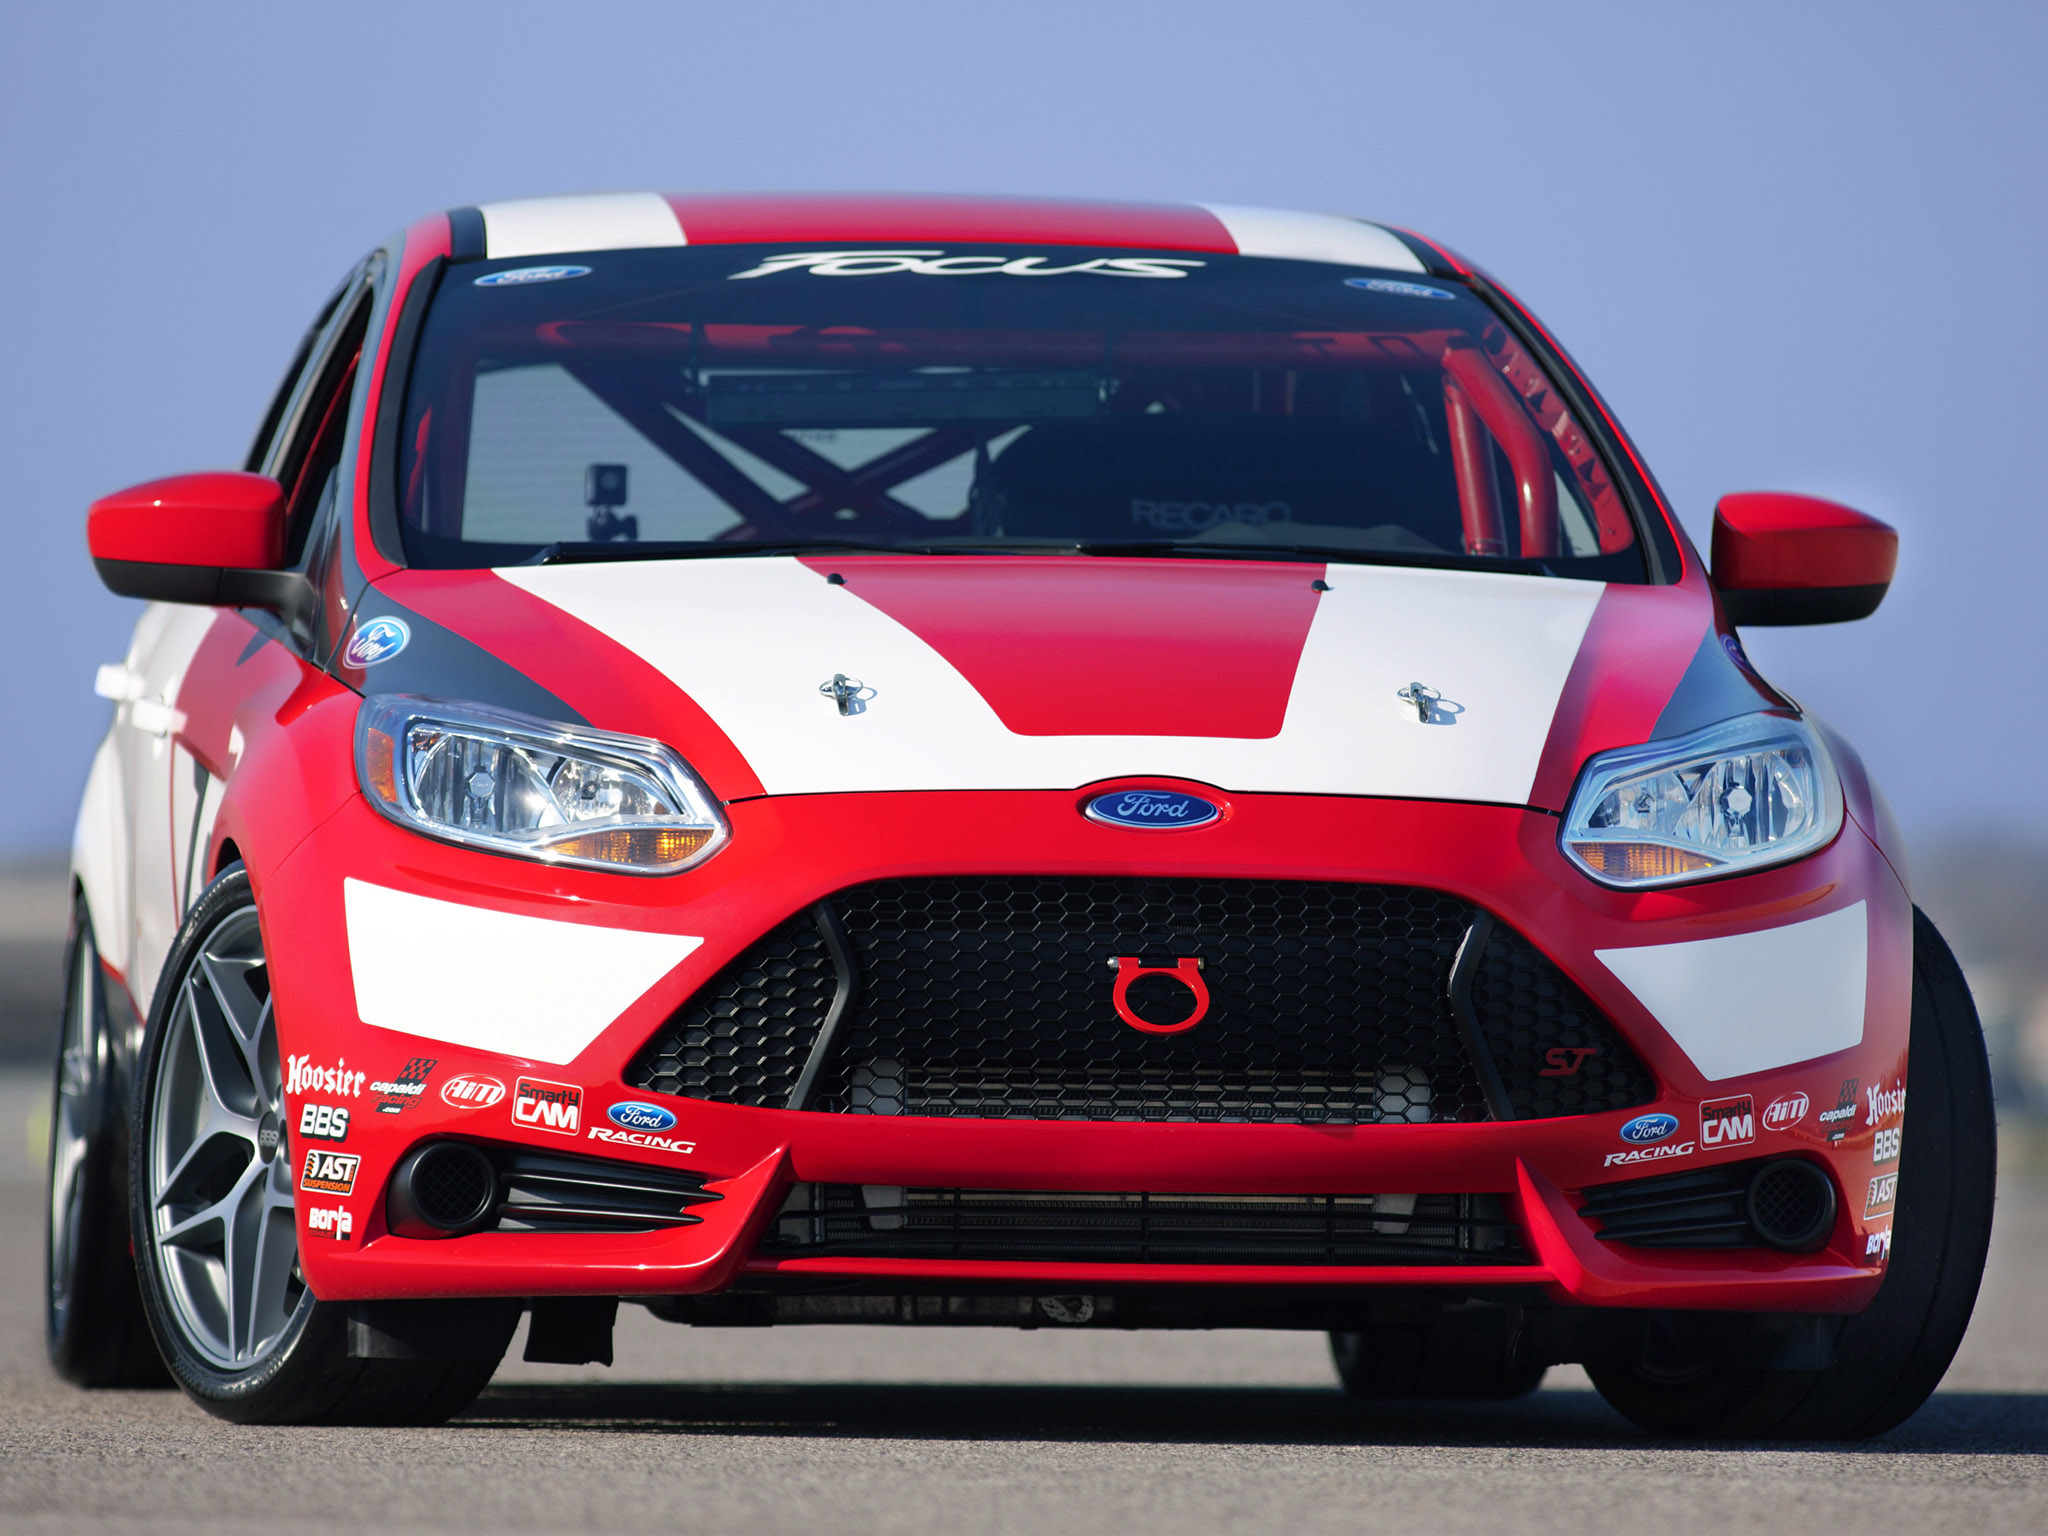 2011, Ford, Focus, Race, Car, Concept, Tuning, Race, Racing Wallpaper